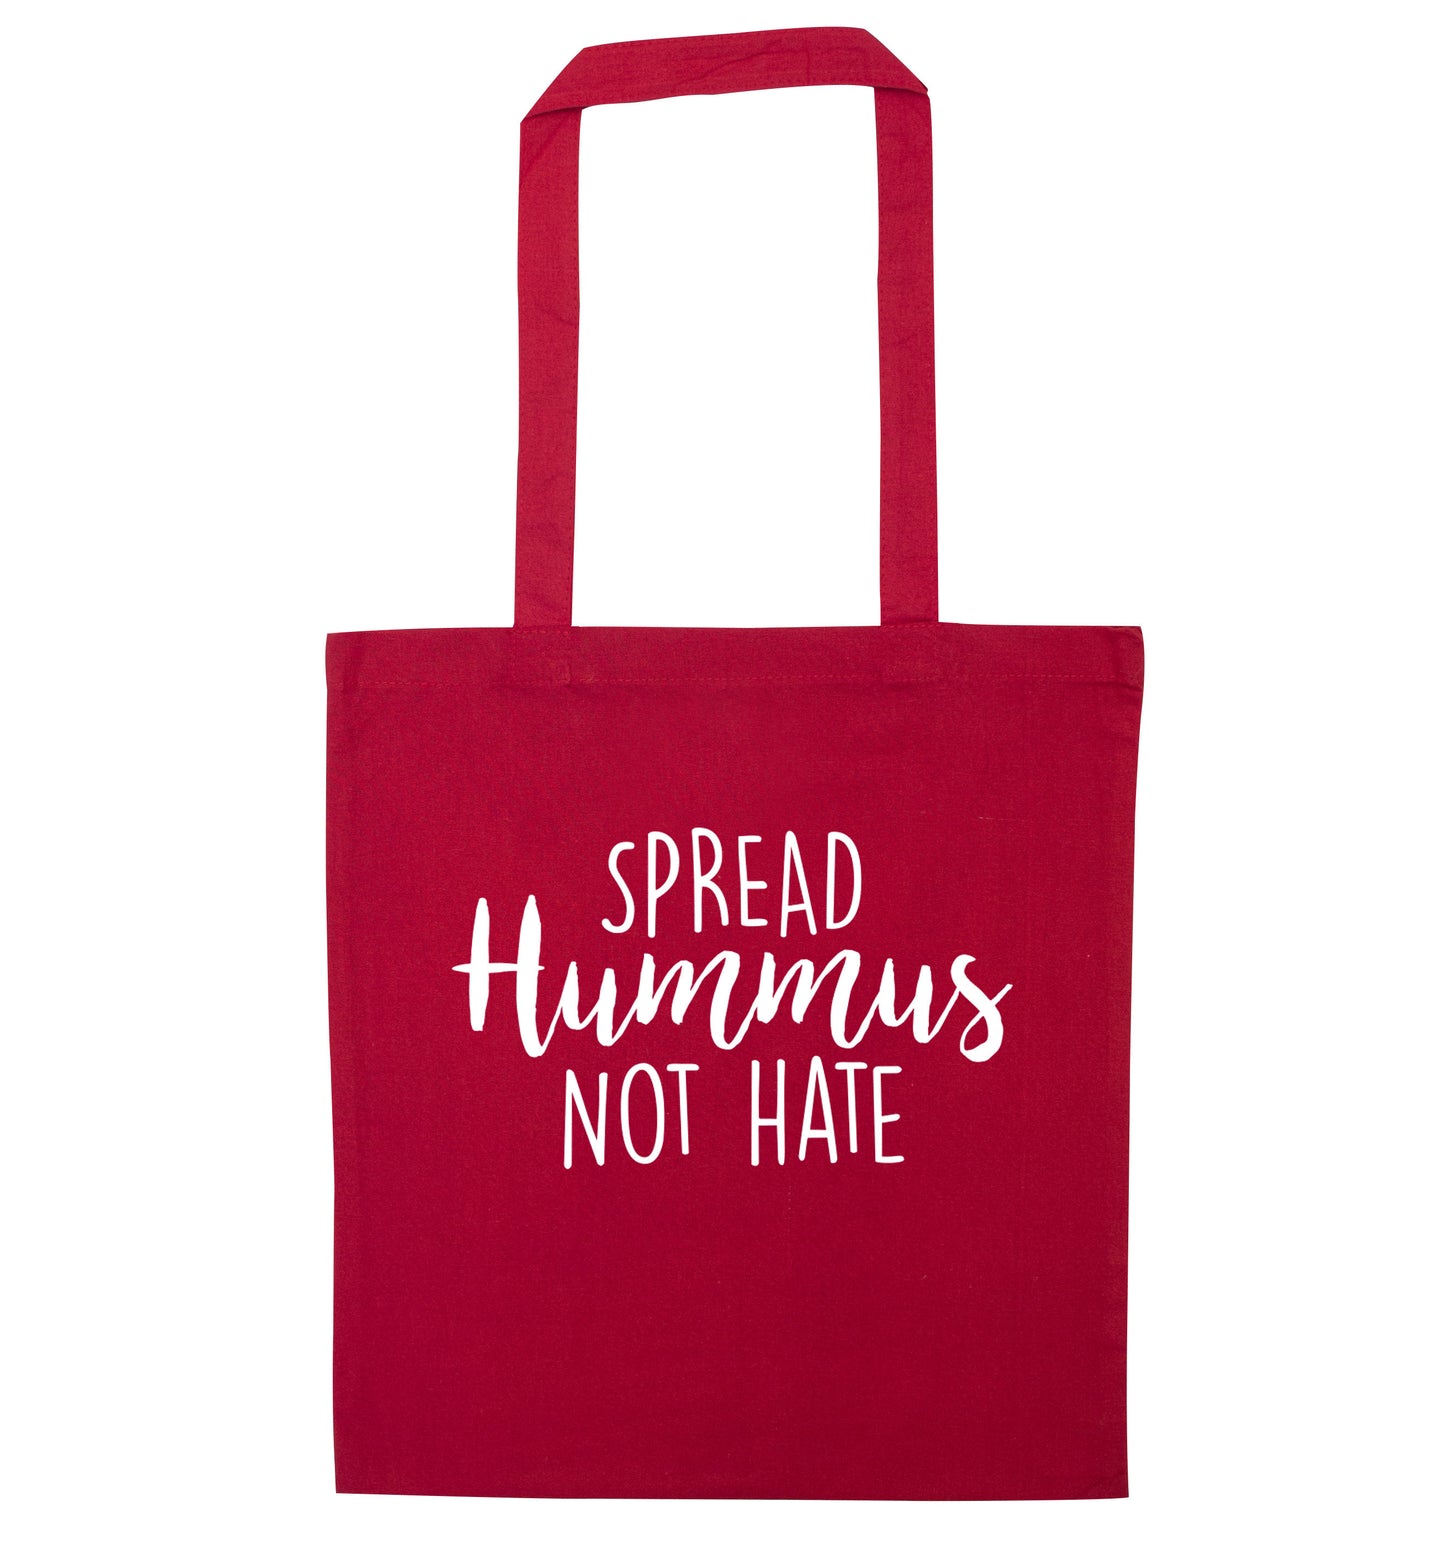 Spread hummus not hate script text red tote bag